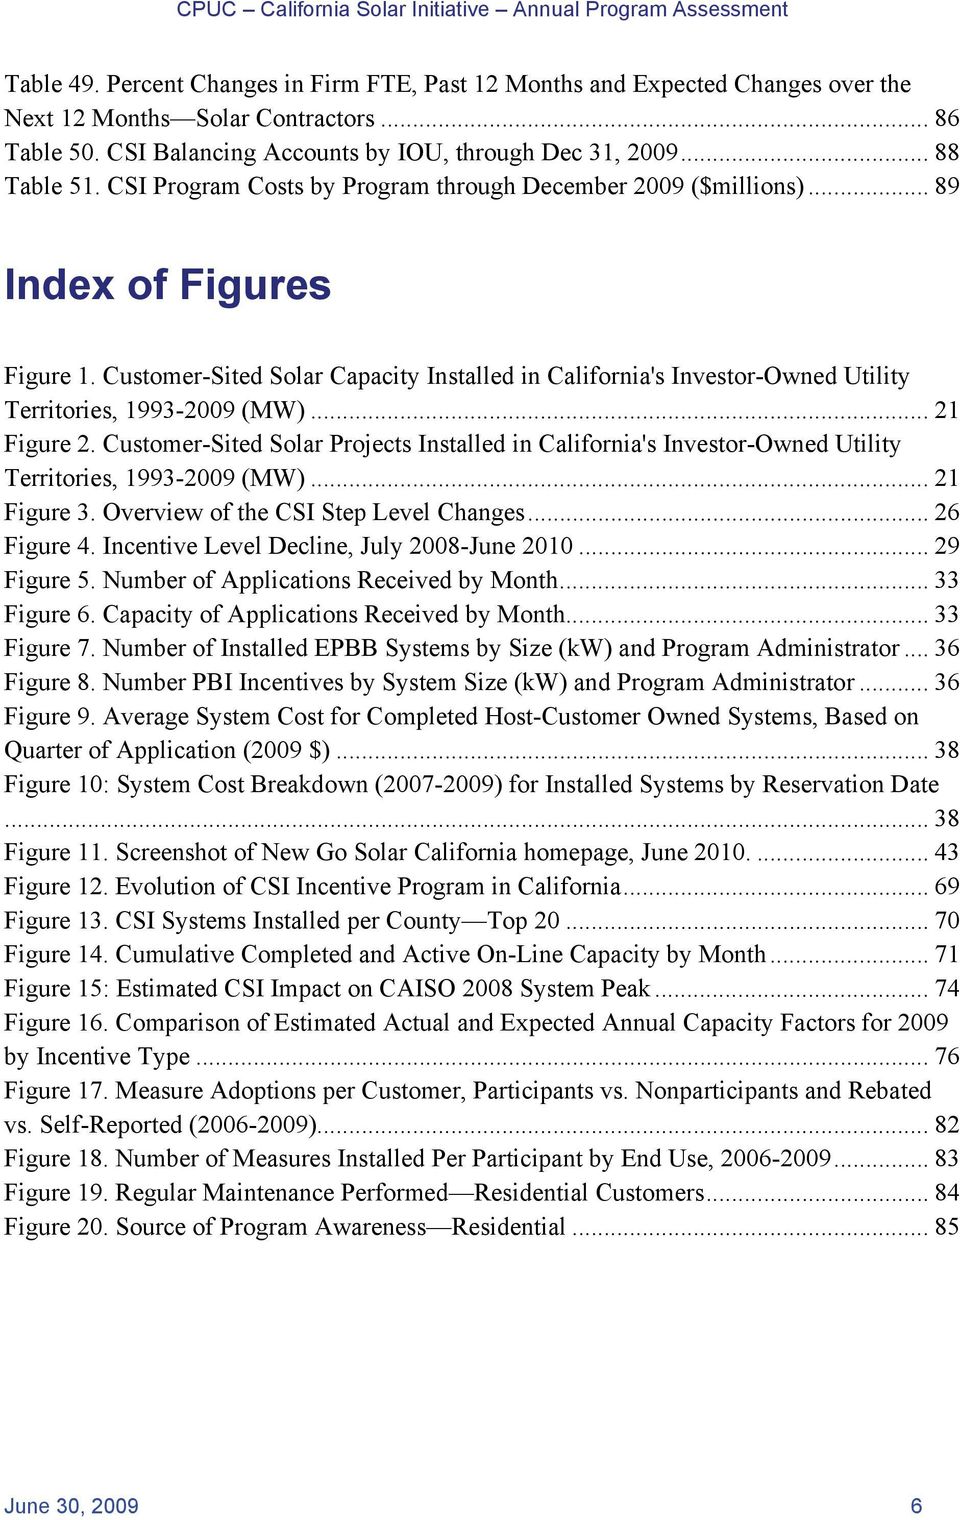 Customer-Sited Solar Capacity Installed in California's Investor-Owned Utility Territories, 1993-2009 (MW)... 21 Figure 2.